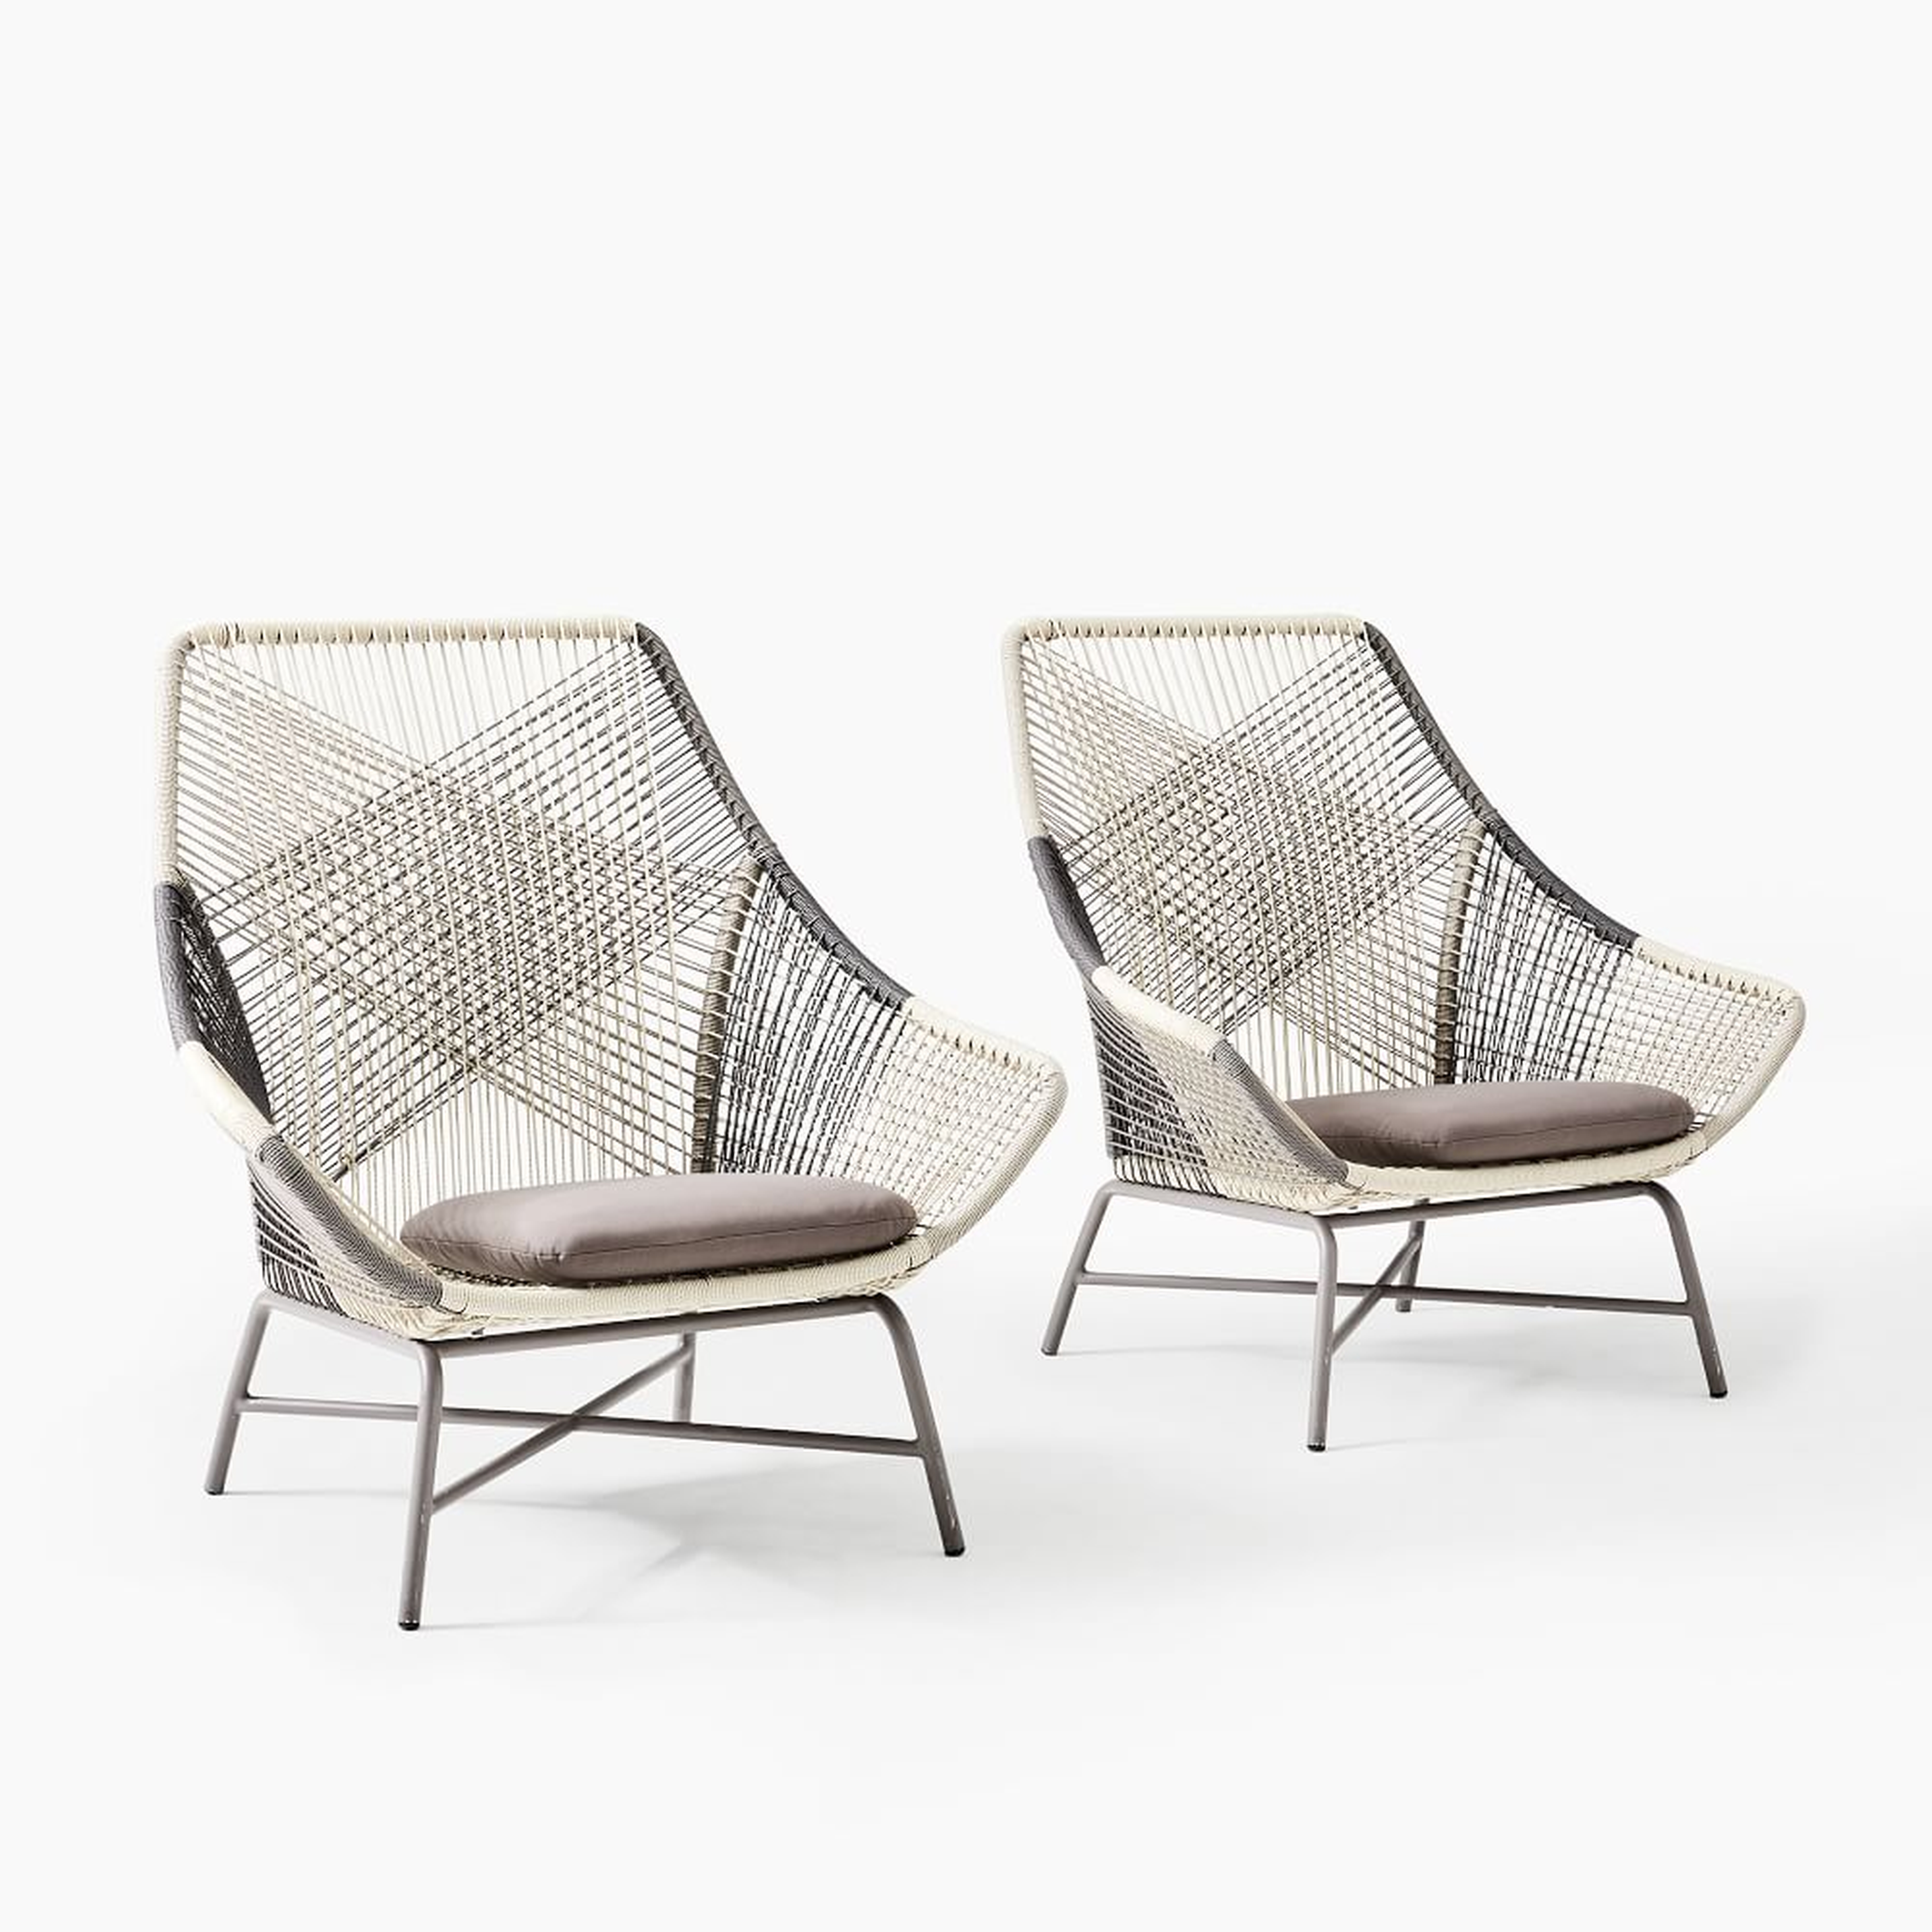 Huron Lounge Chair, Large, Set of 2 - West Elm